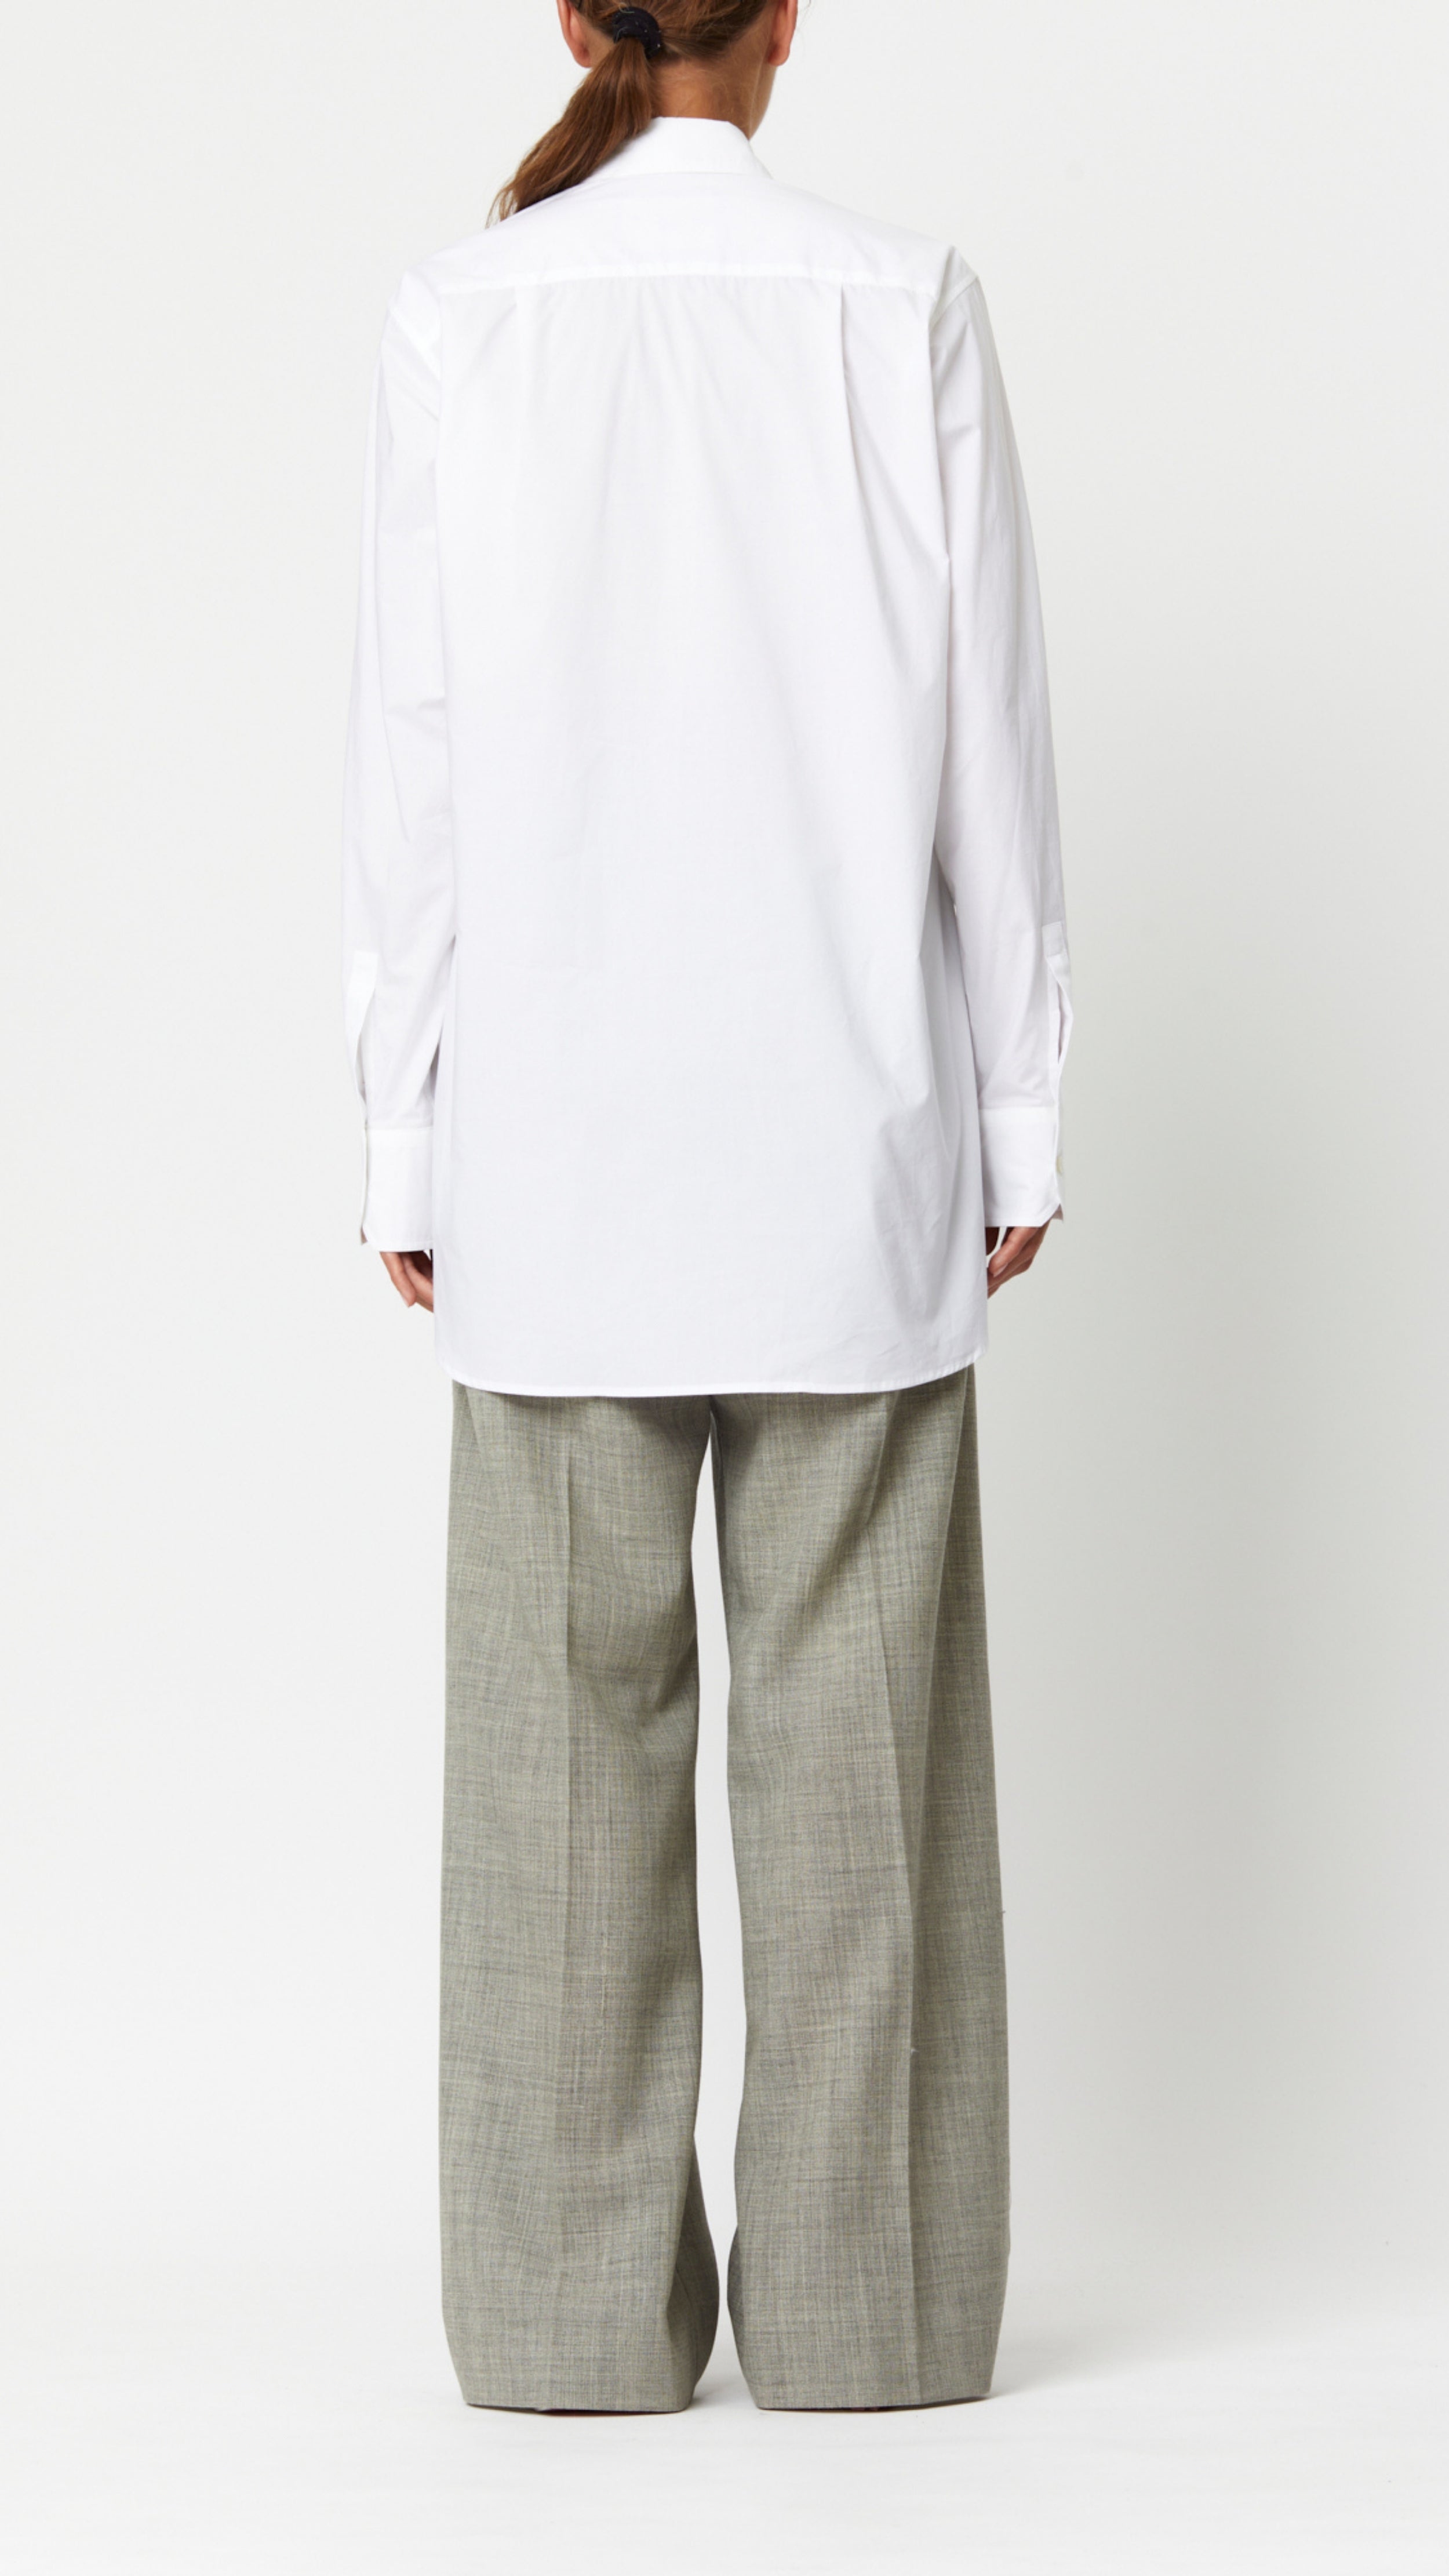 Plan C Cotton Poplin Tuxedo Shirt 100% cotton tuxedo style blouse with a pleated shoulder, long sleeves, and cuffs. Slightly oversize men's style fit. Shown on model facing back.